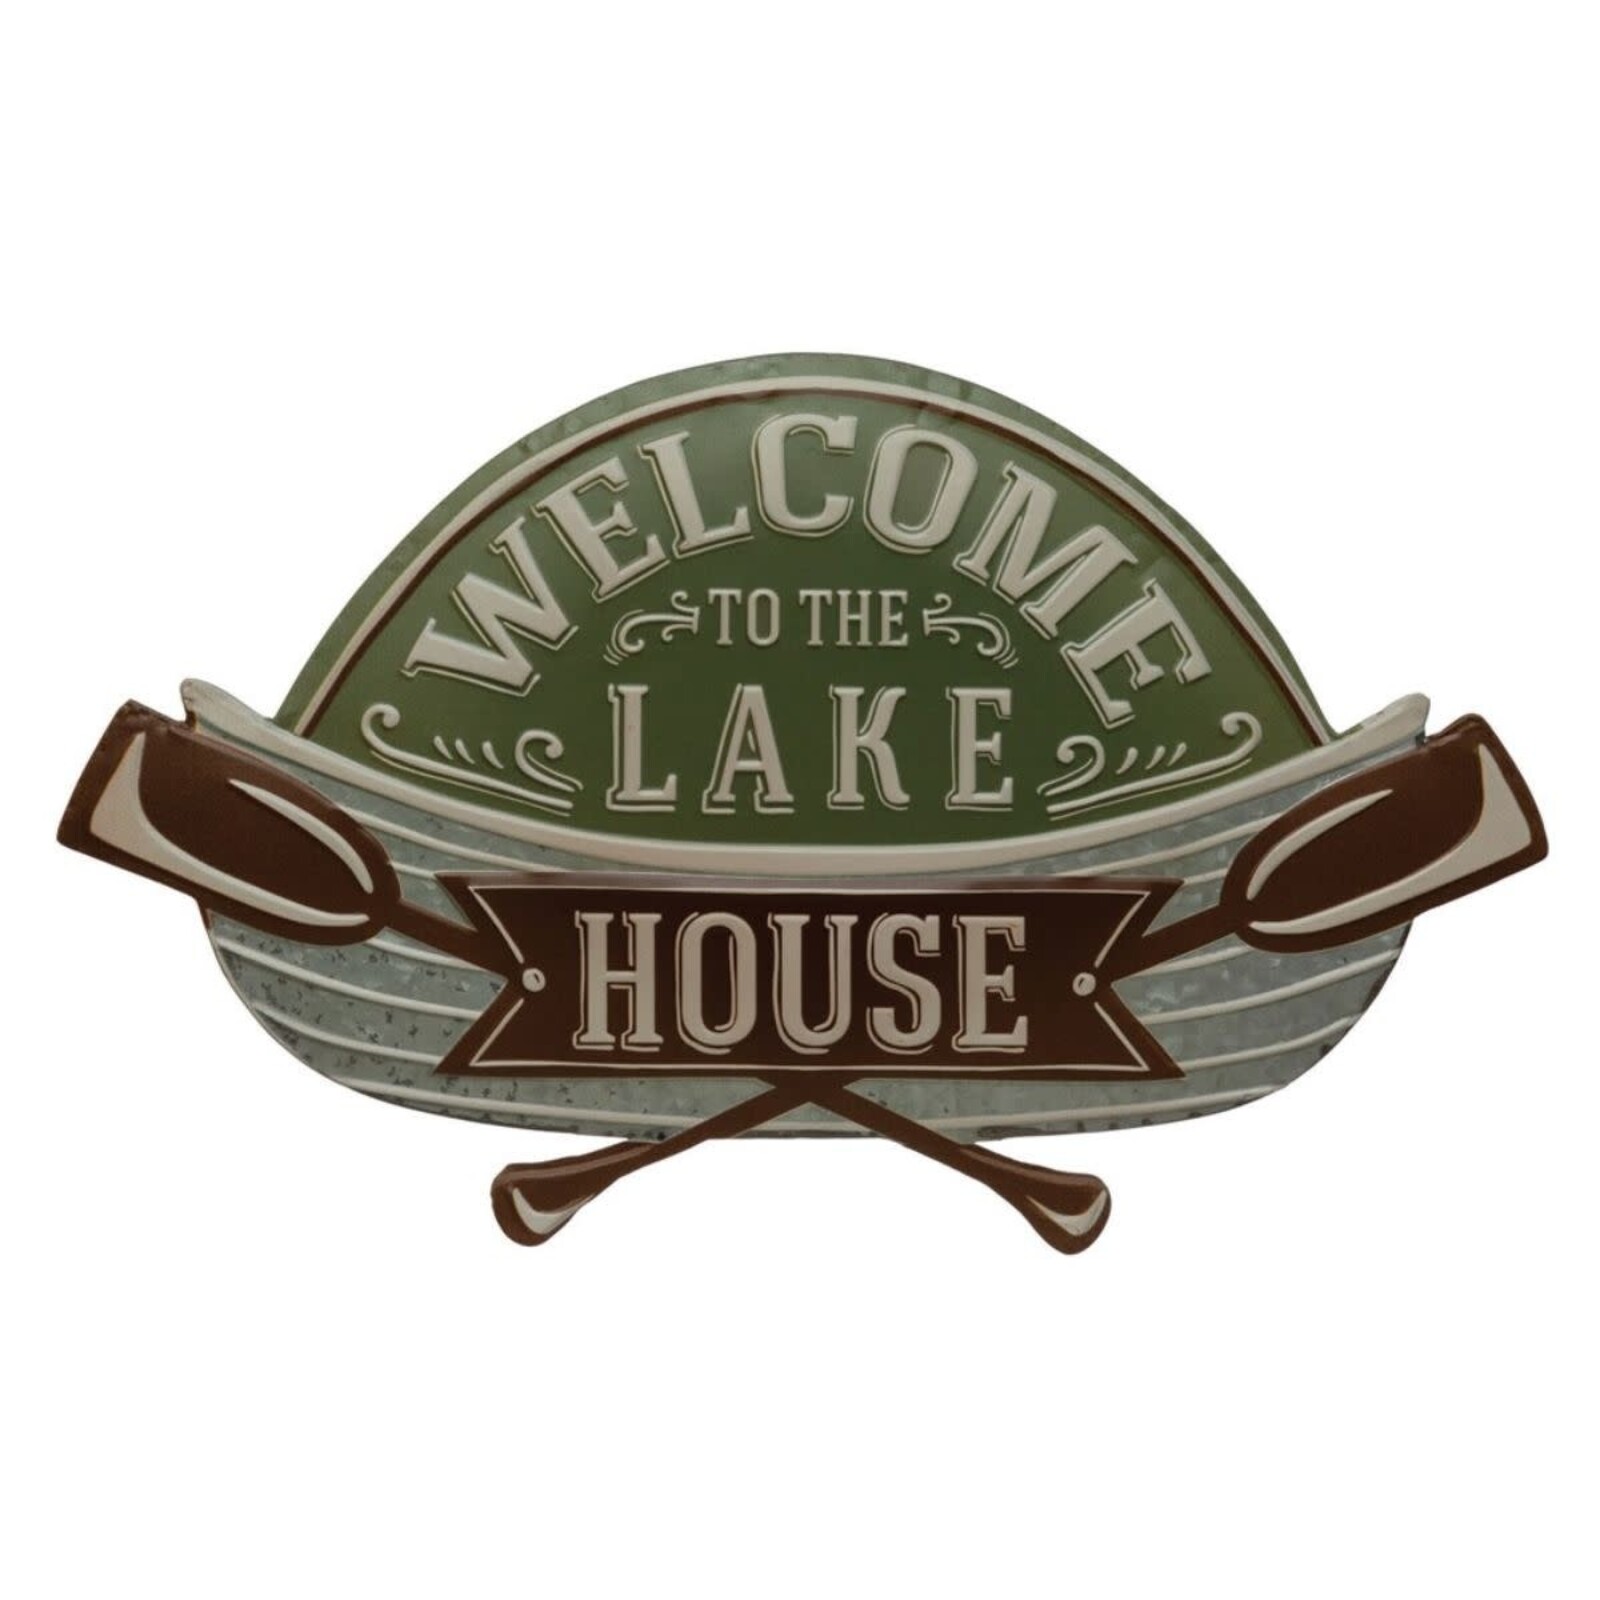 Creative Co-Op 24"W x 15"H Embossed Metal Wall Decor "Welcome to the Lake House", DF4059 loading=